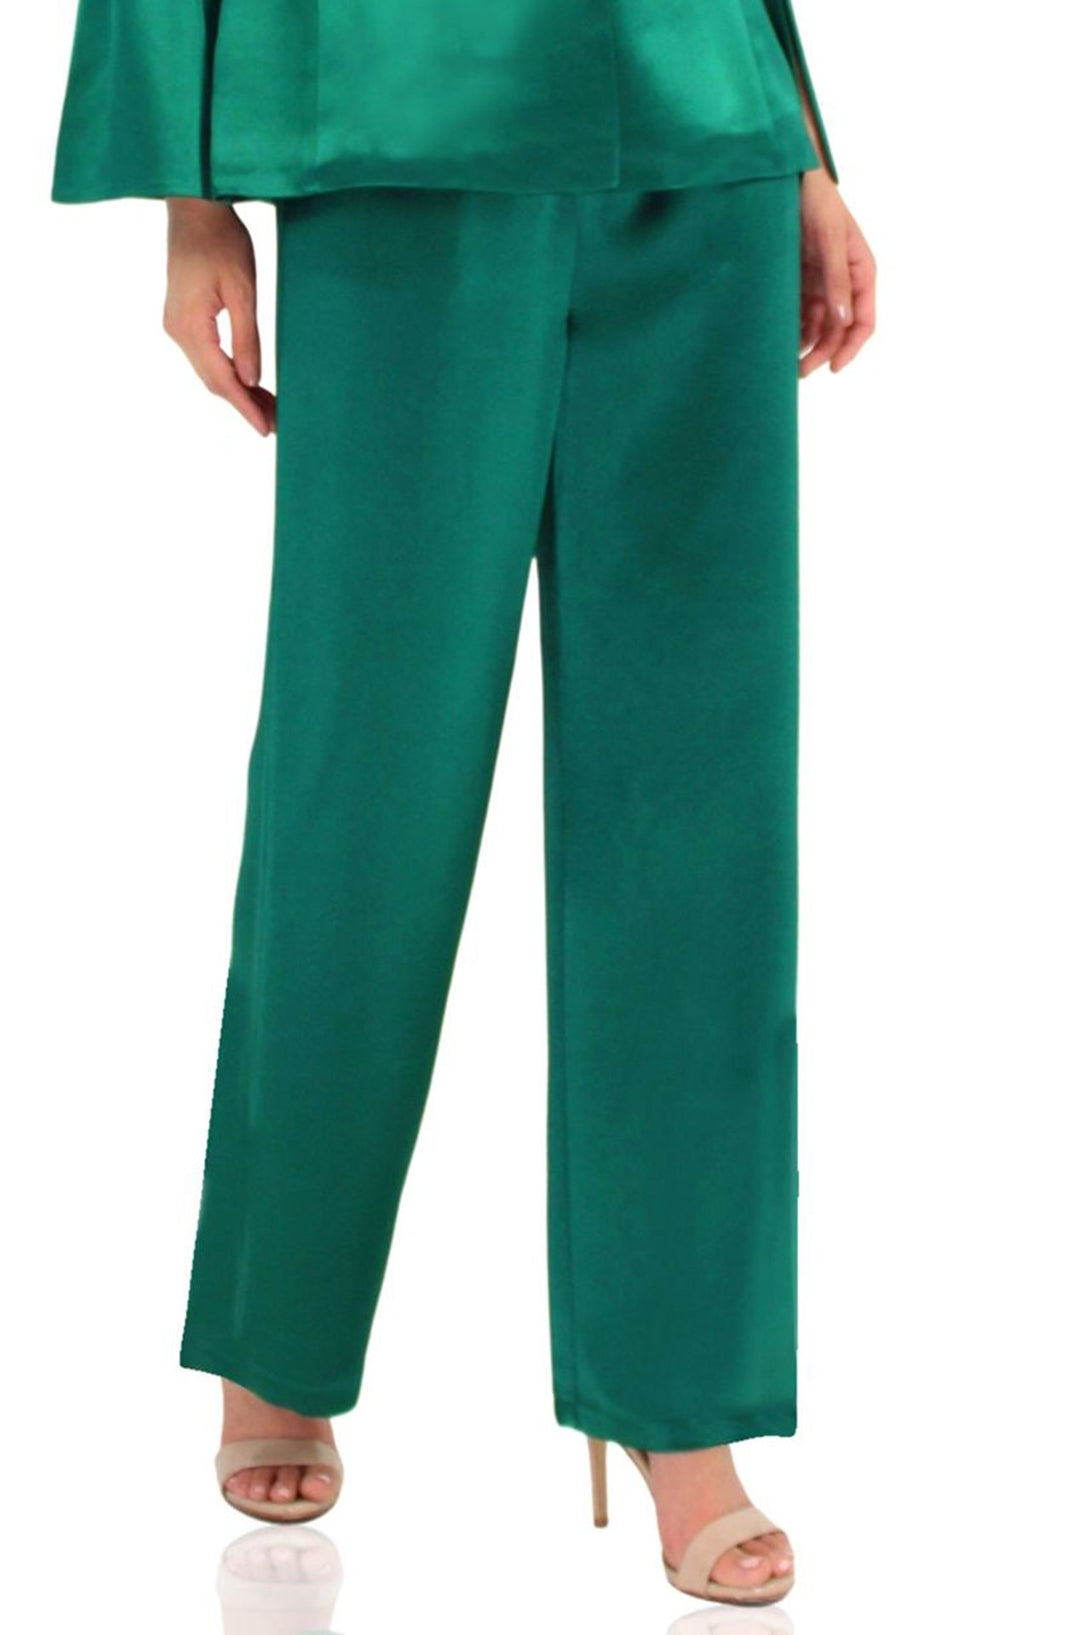 Kyle-Richard-Straight-Fit-Womens-Pants-In-Green